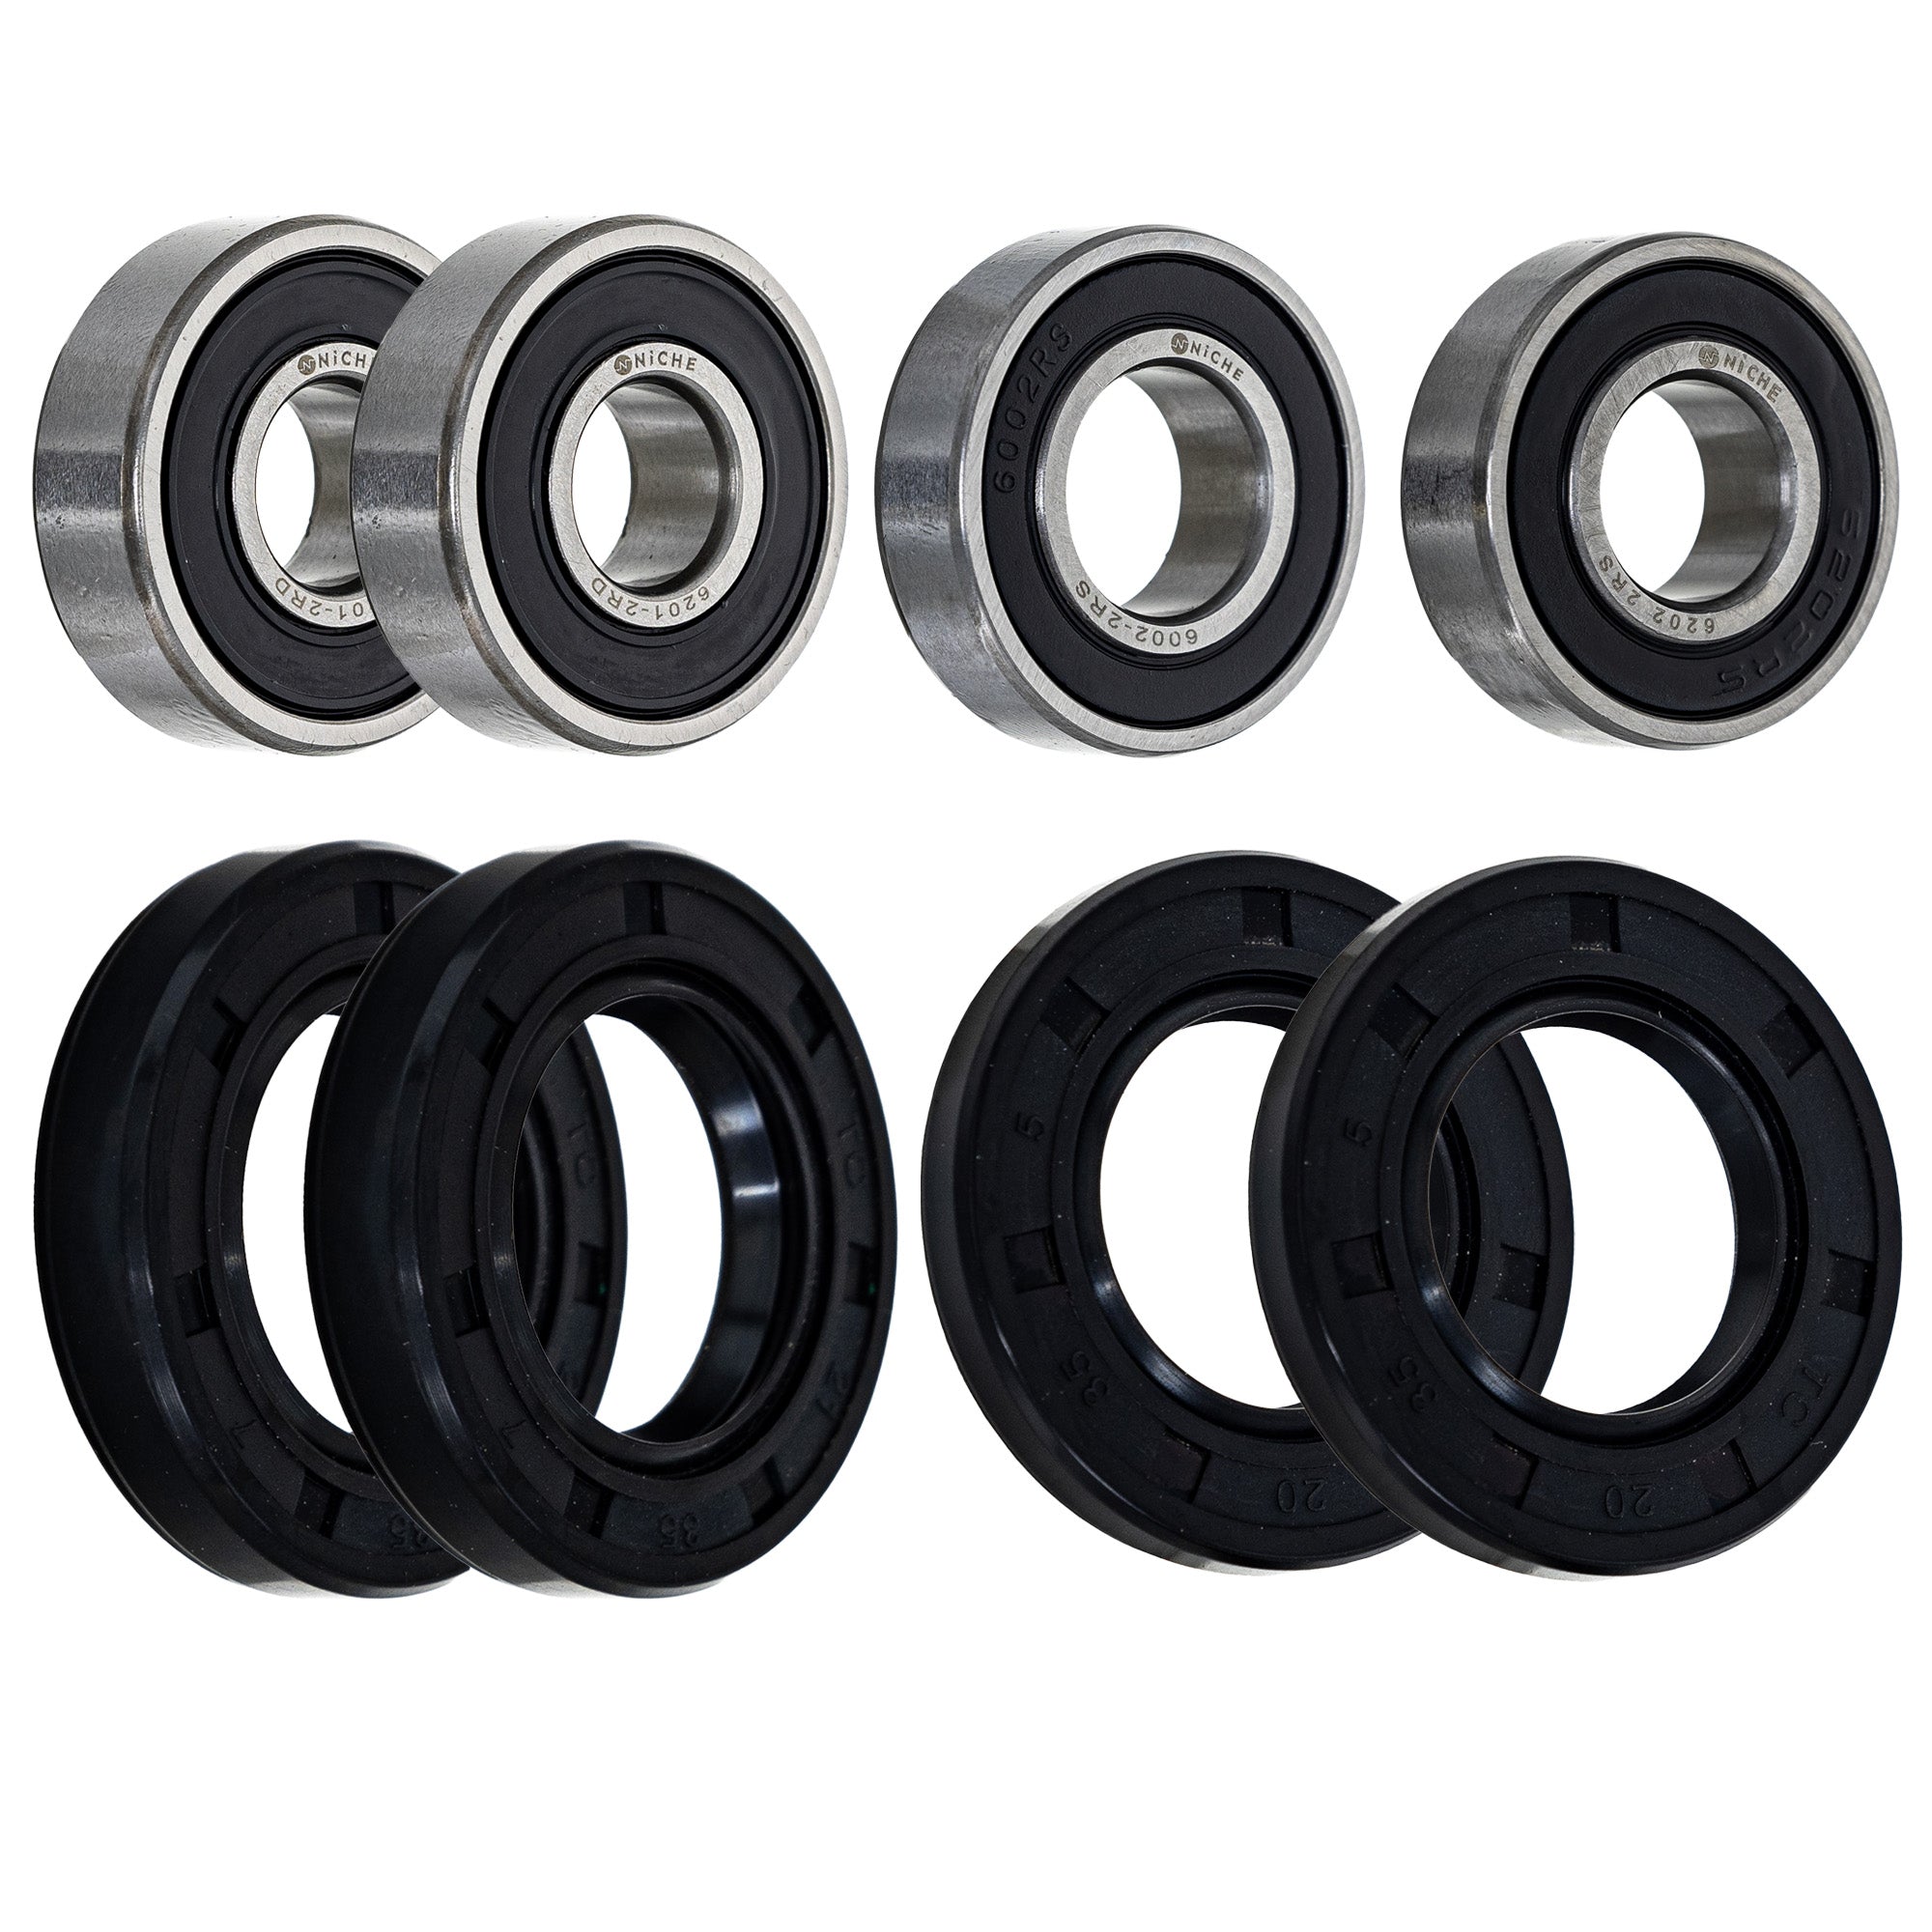 Wheel Bearing Seal Kit for zOTHER Ref No RM85L RM85 RM80 Expert NICHE MK1008733